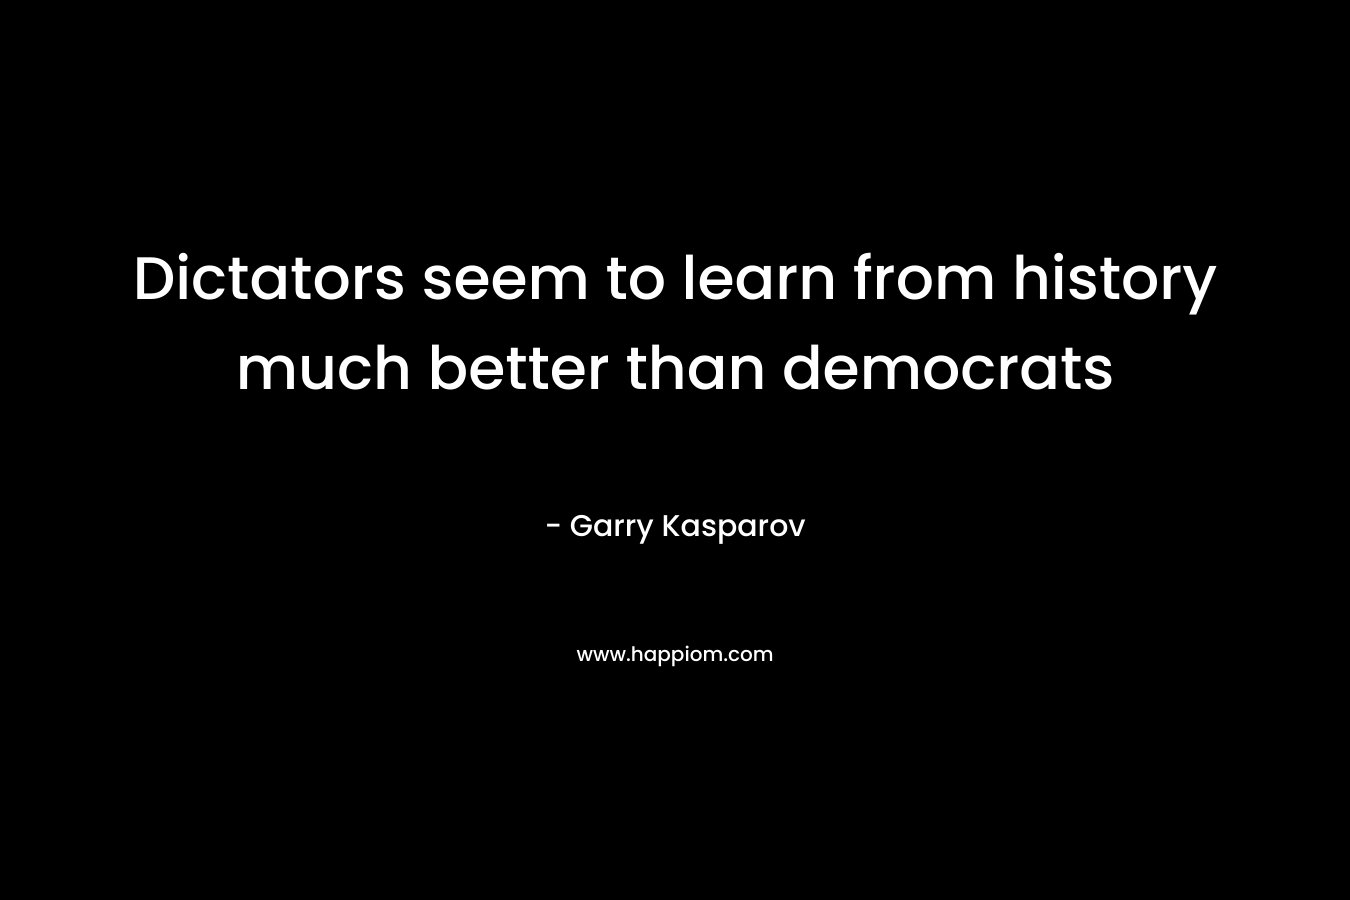 Dictators seem to learn from history much better than democrats